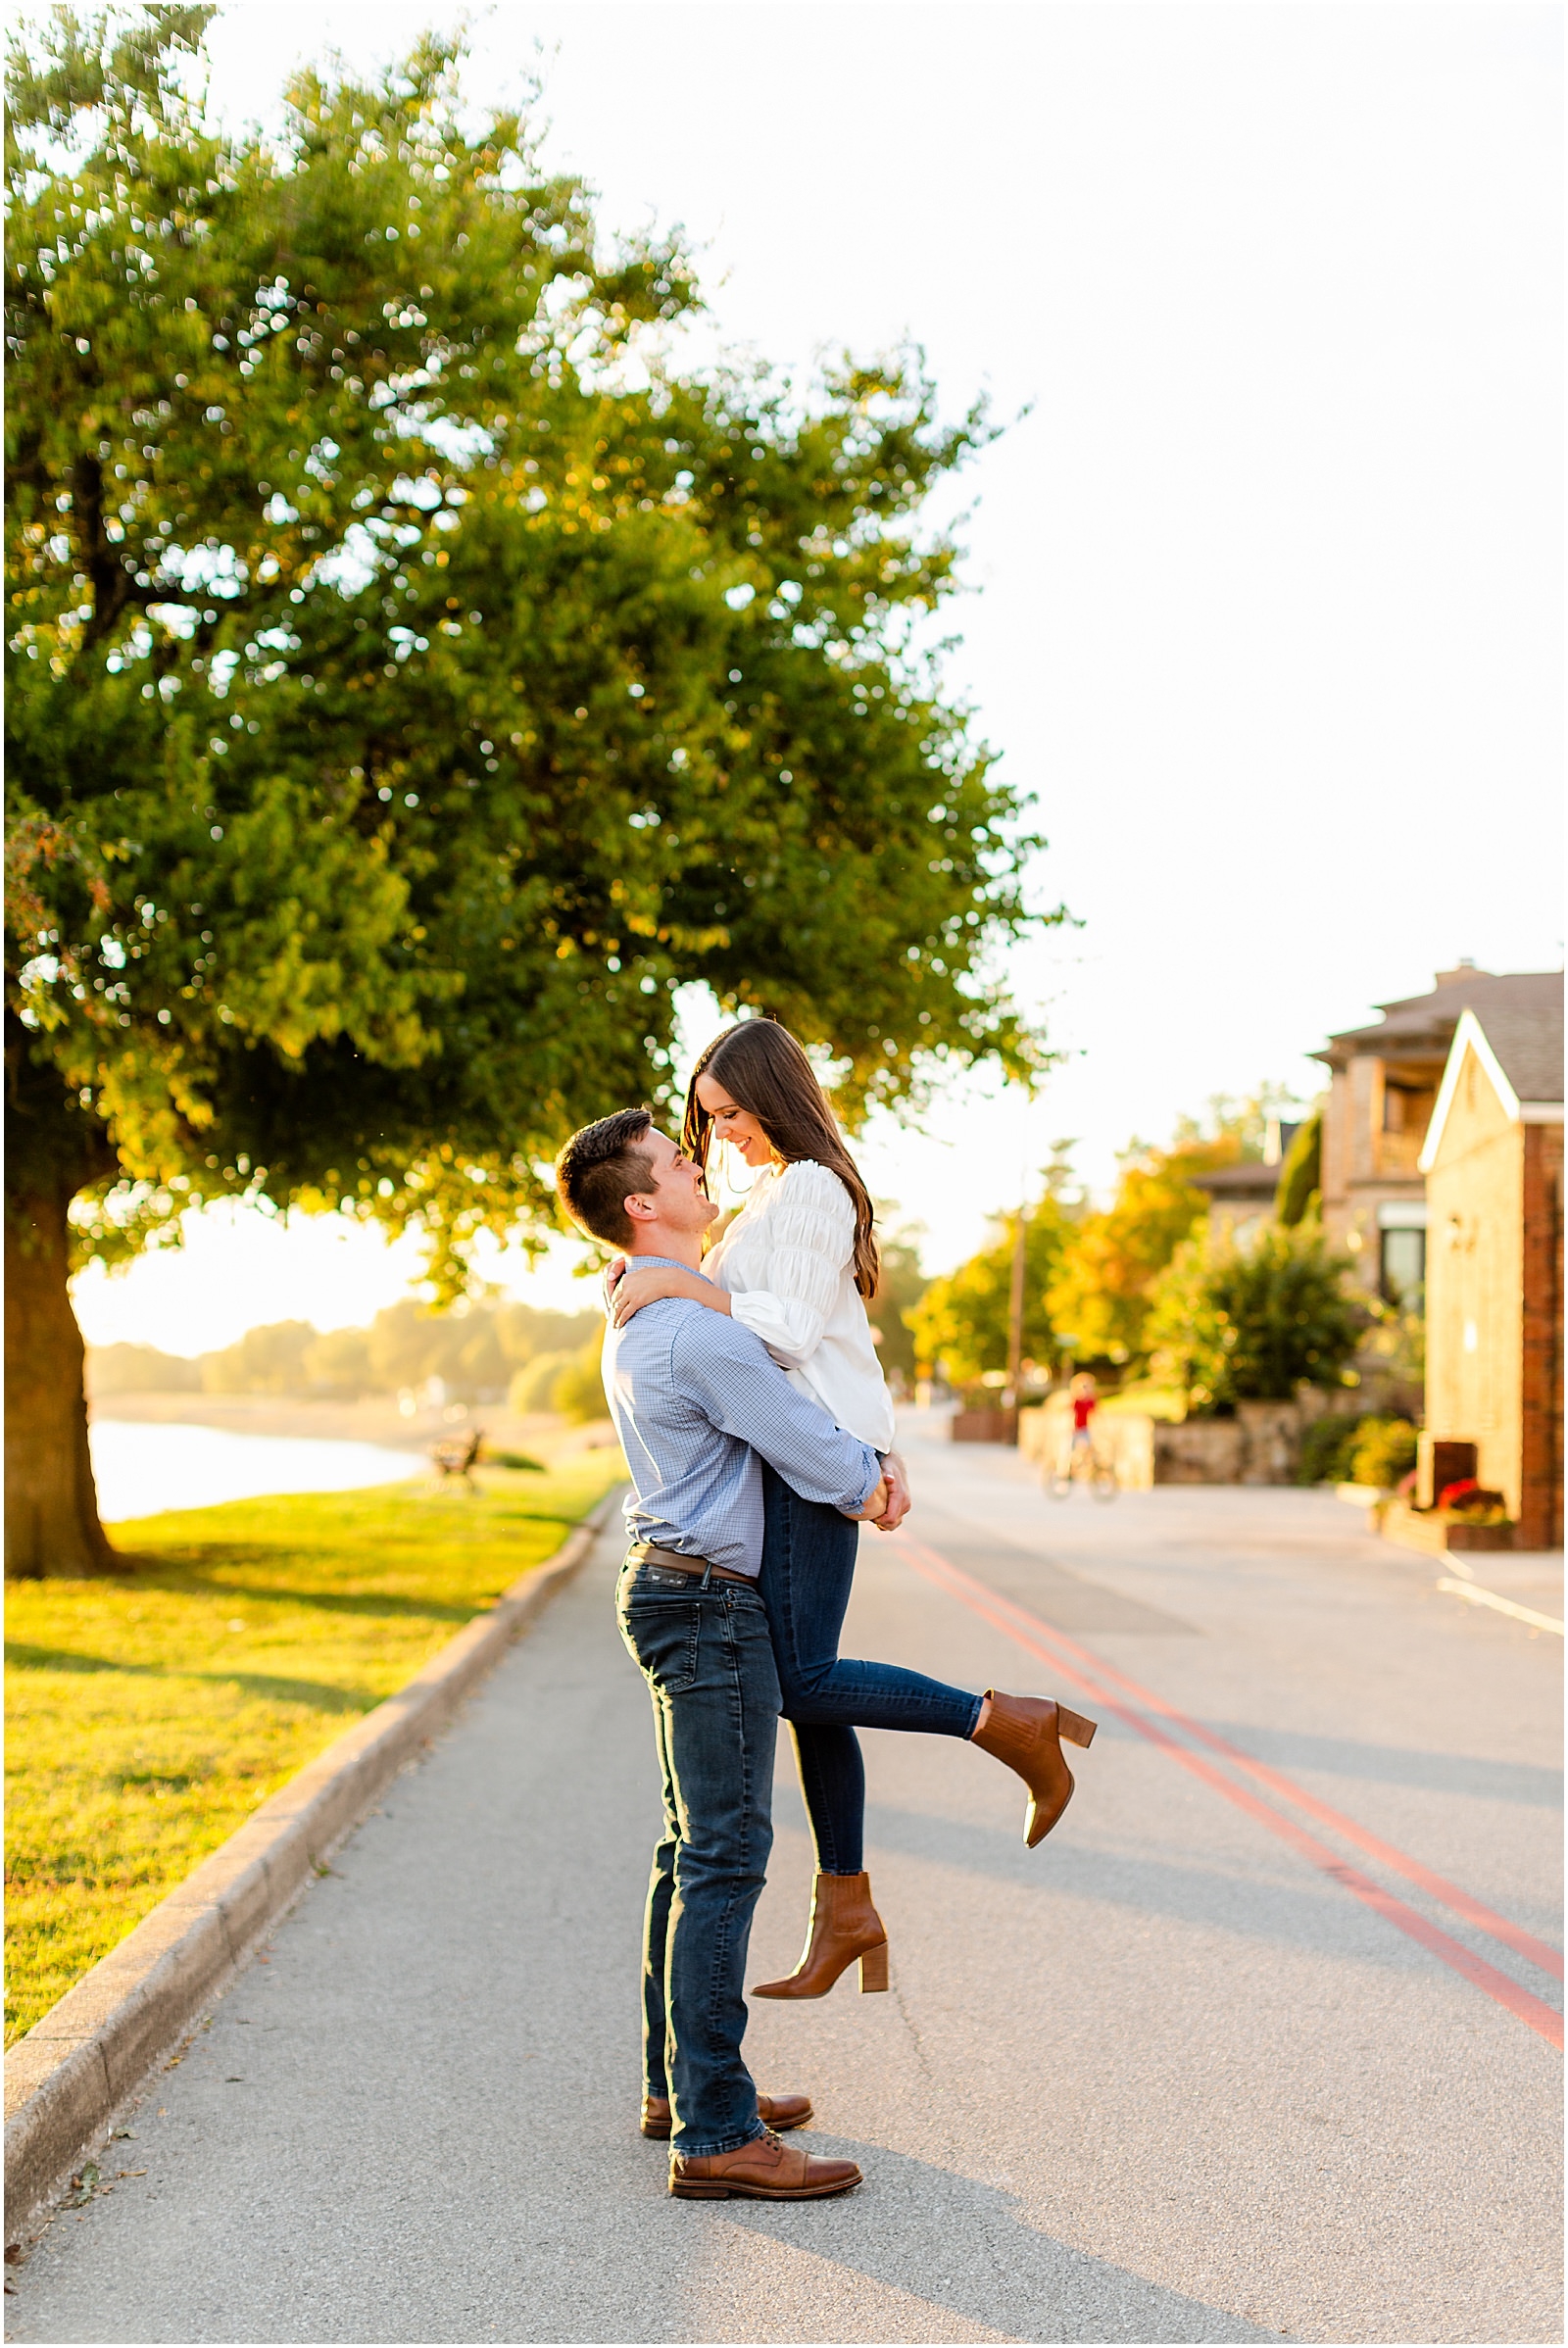 Emma and Jace's Downtown Newburgh Engagement Session | Bret and Brandie Photography | Evansville Indiana Wedding Photographers_0044.jpg